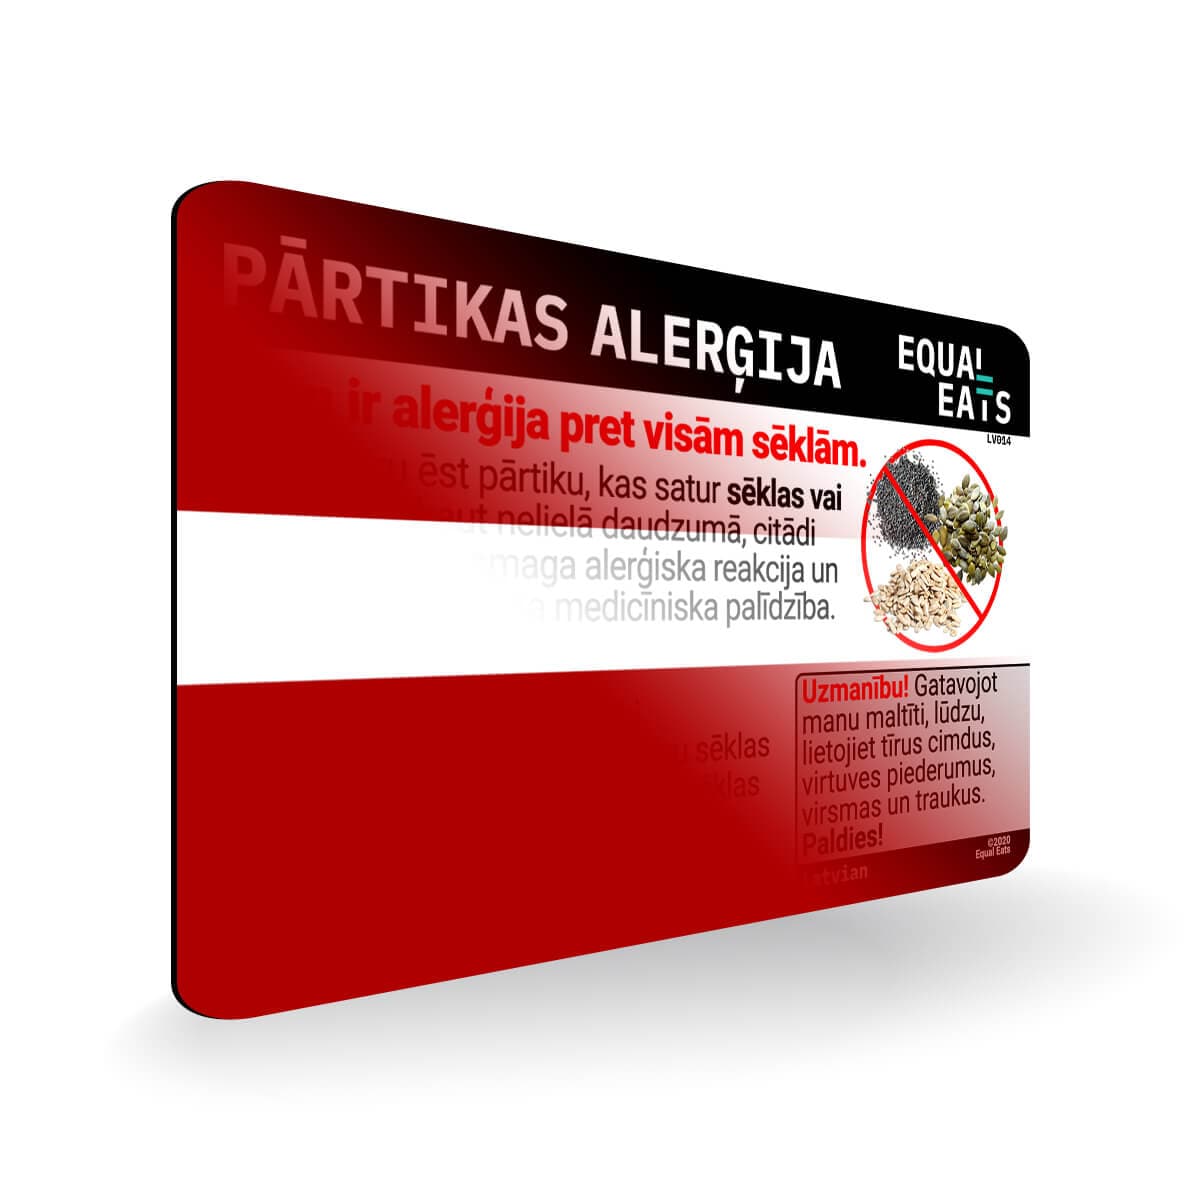 Seed Allergy in Latvian. Seed Allergy Card for Latvia